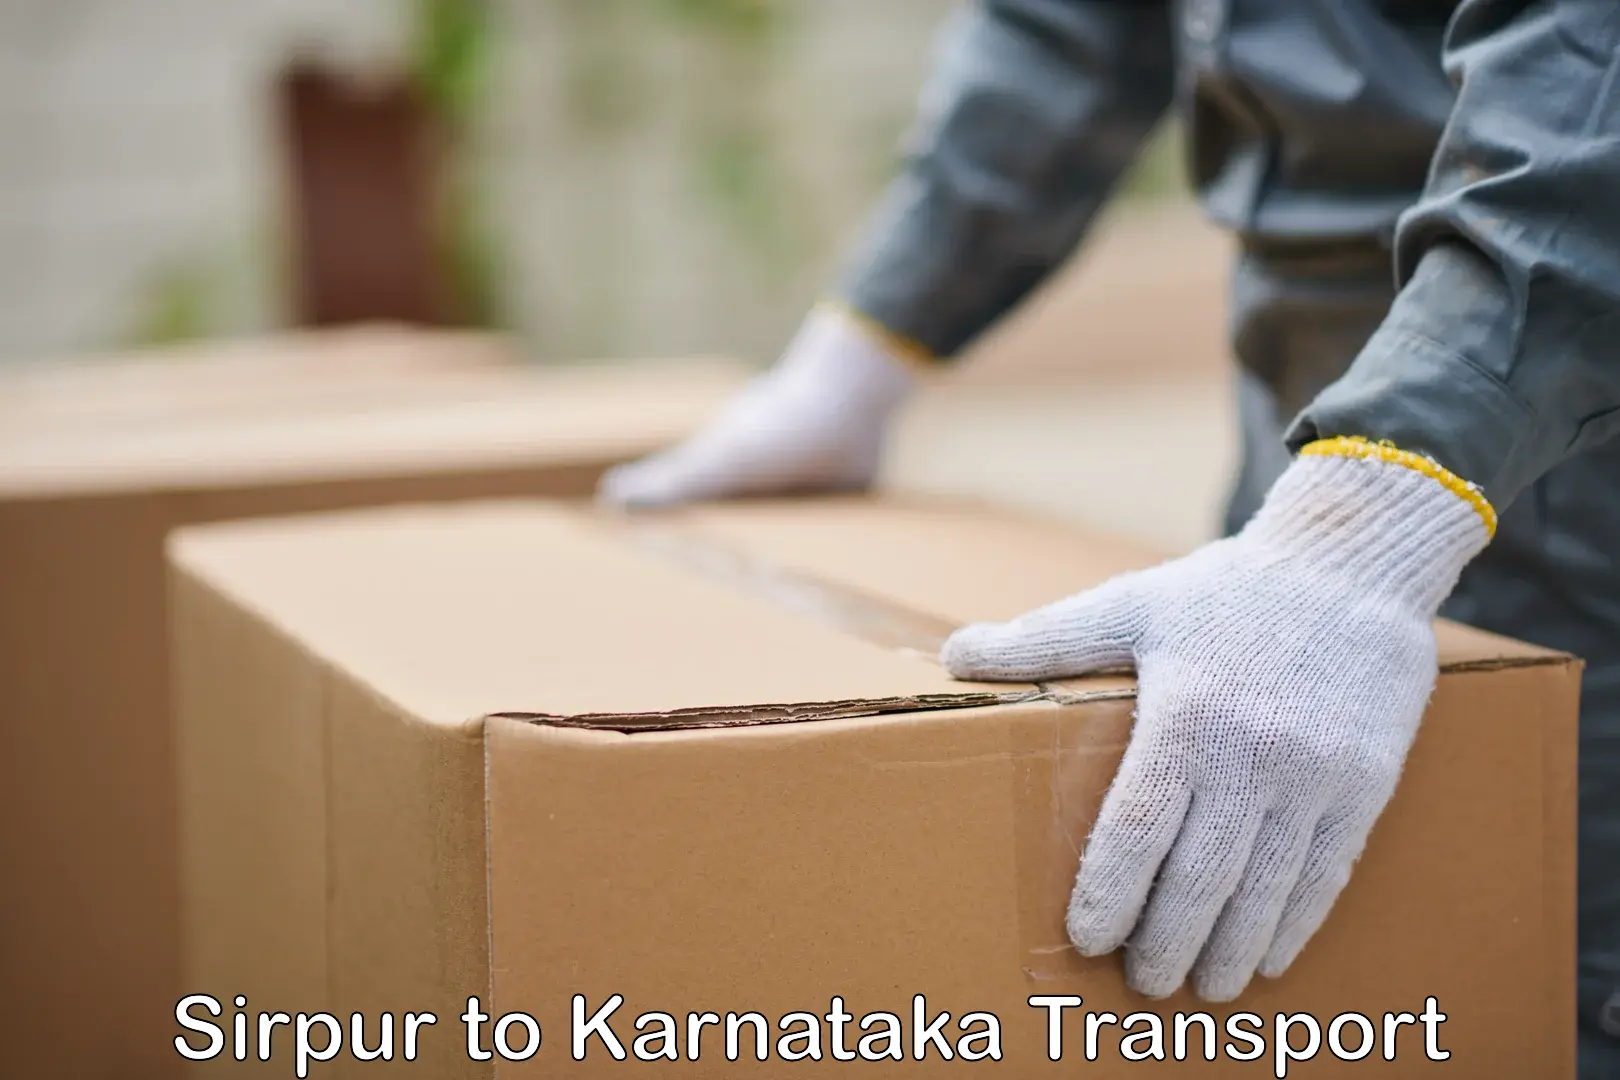 Truck transport companies in India in Sirpur to Yellare